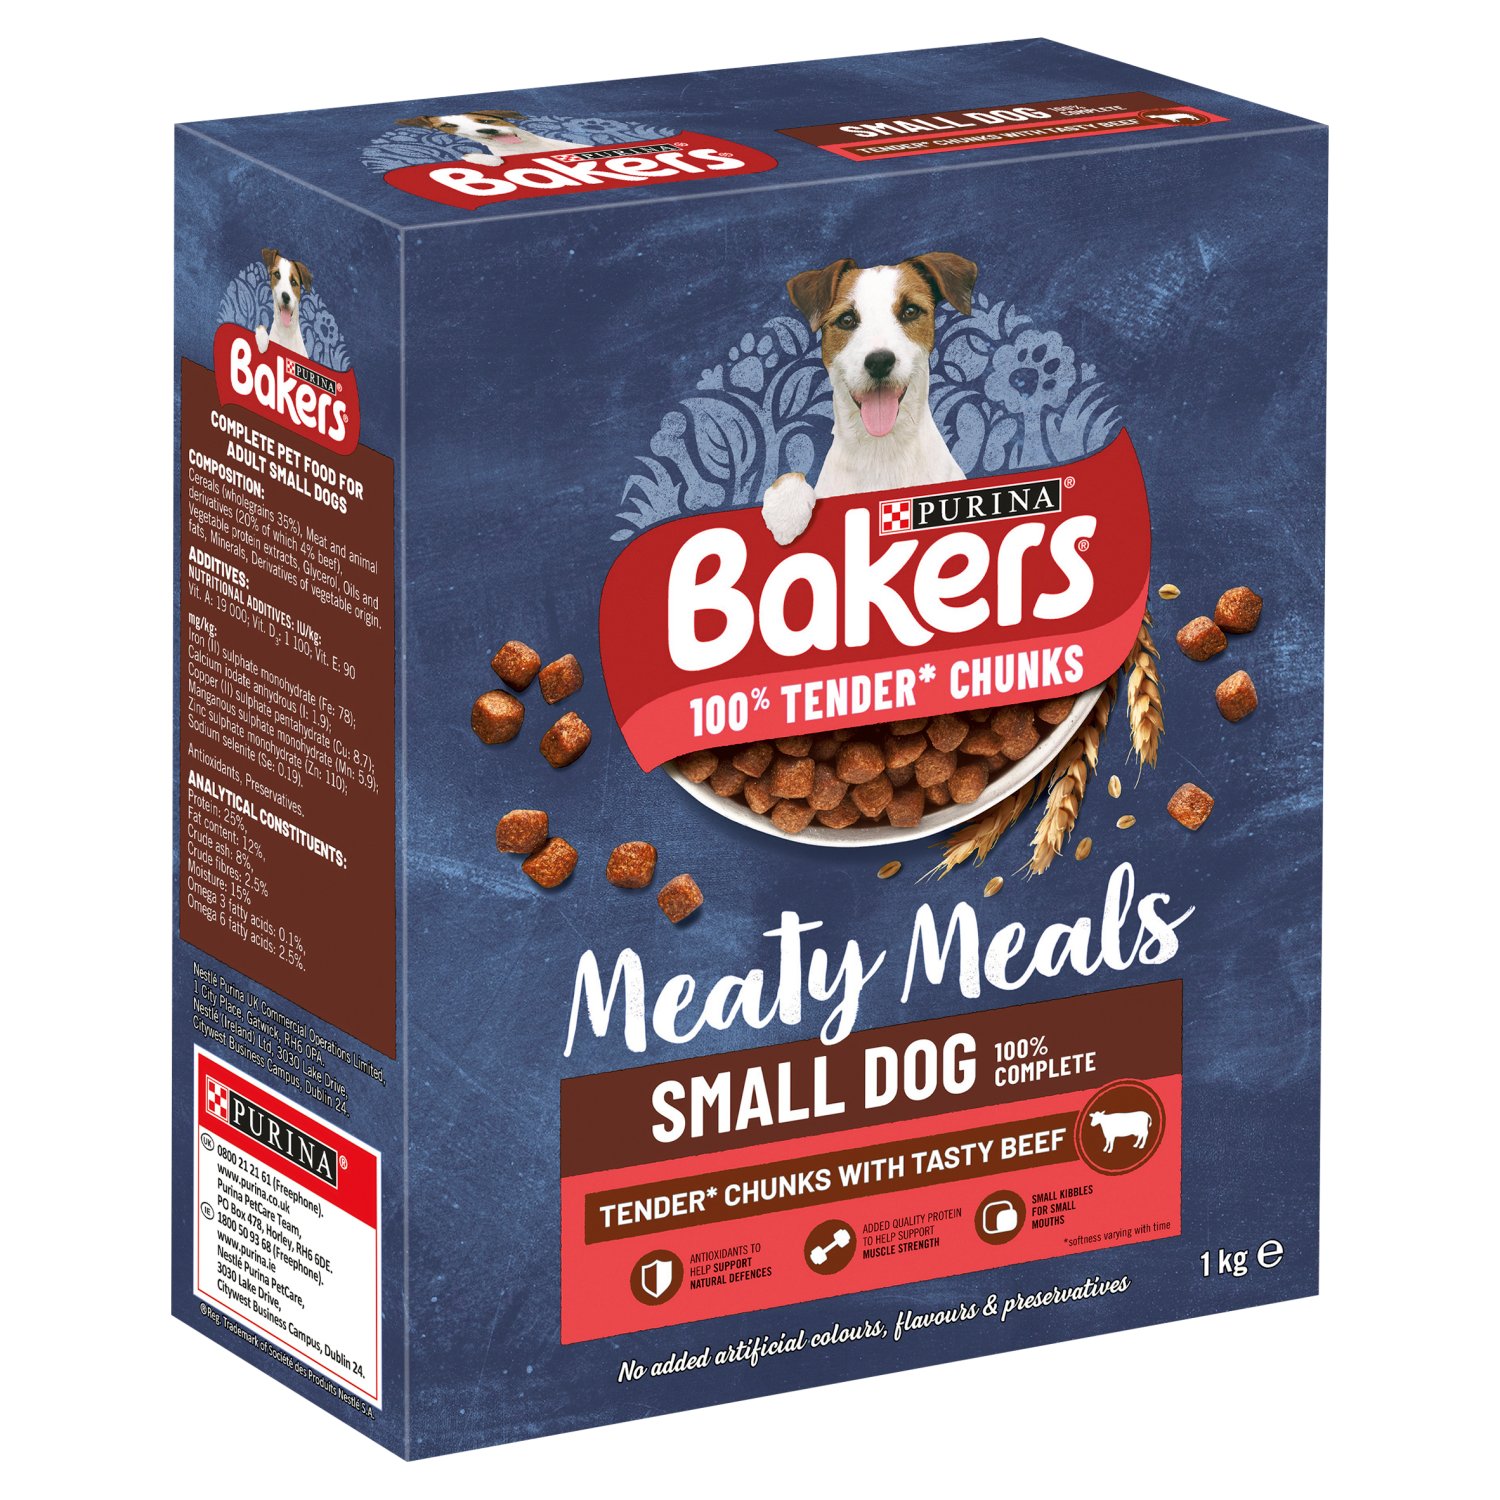 Bakers Meaty Meals Beef Small Dog Food (1 kg)